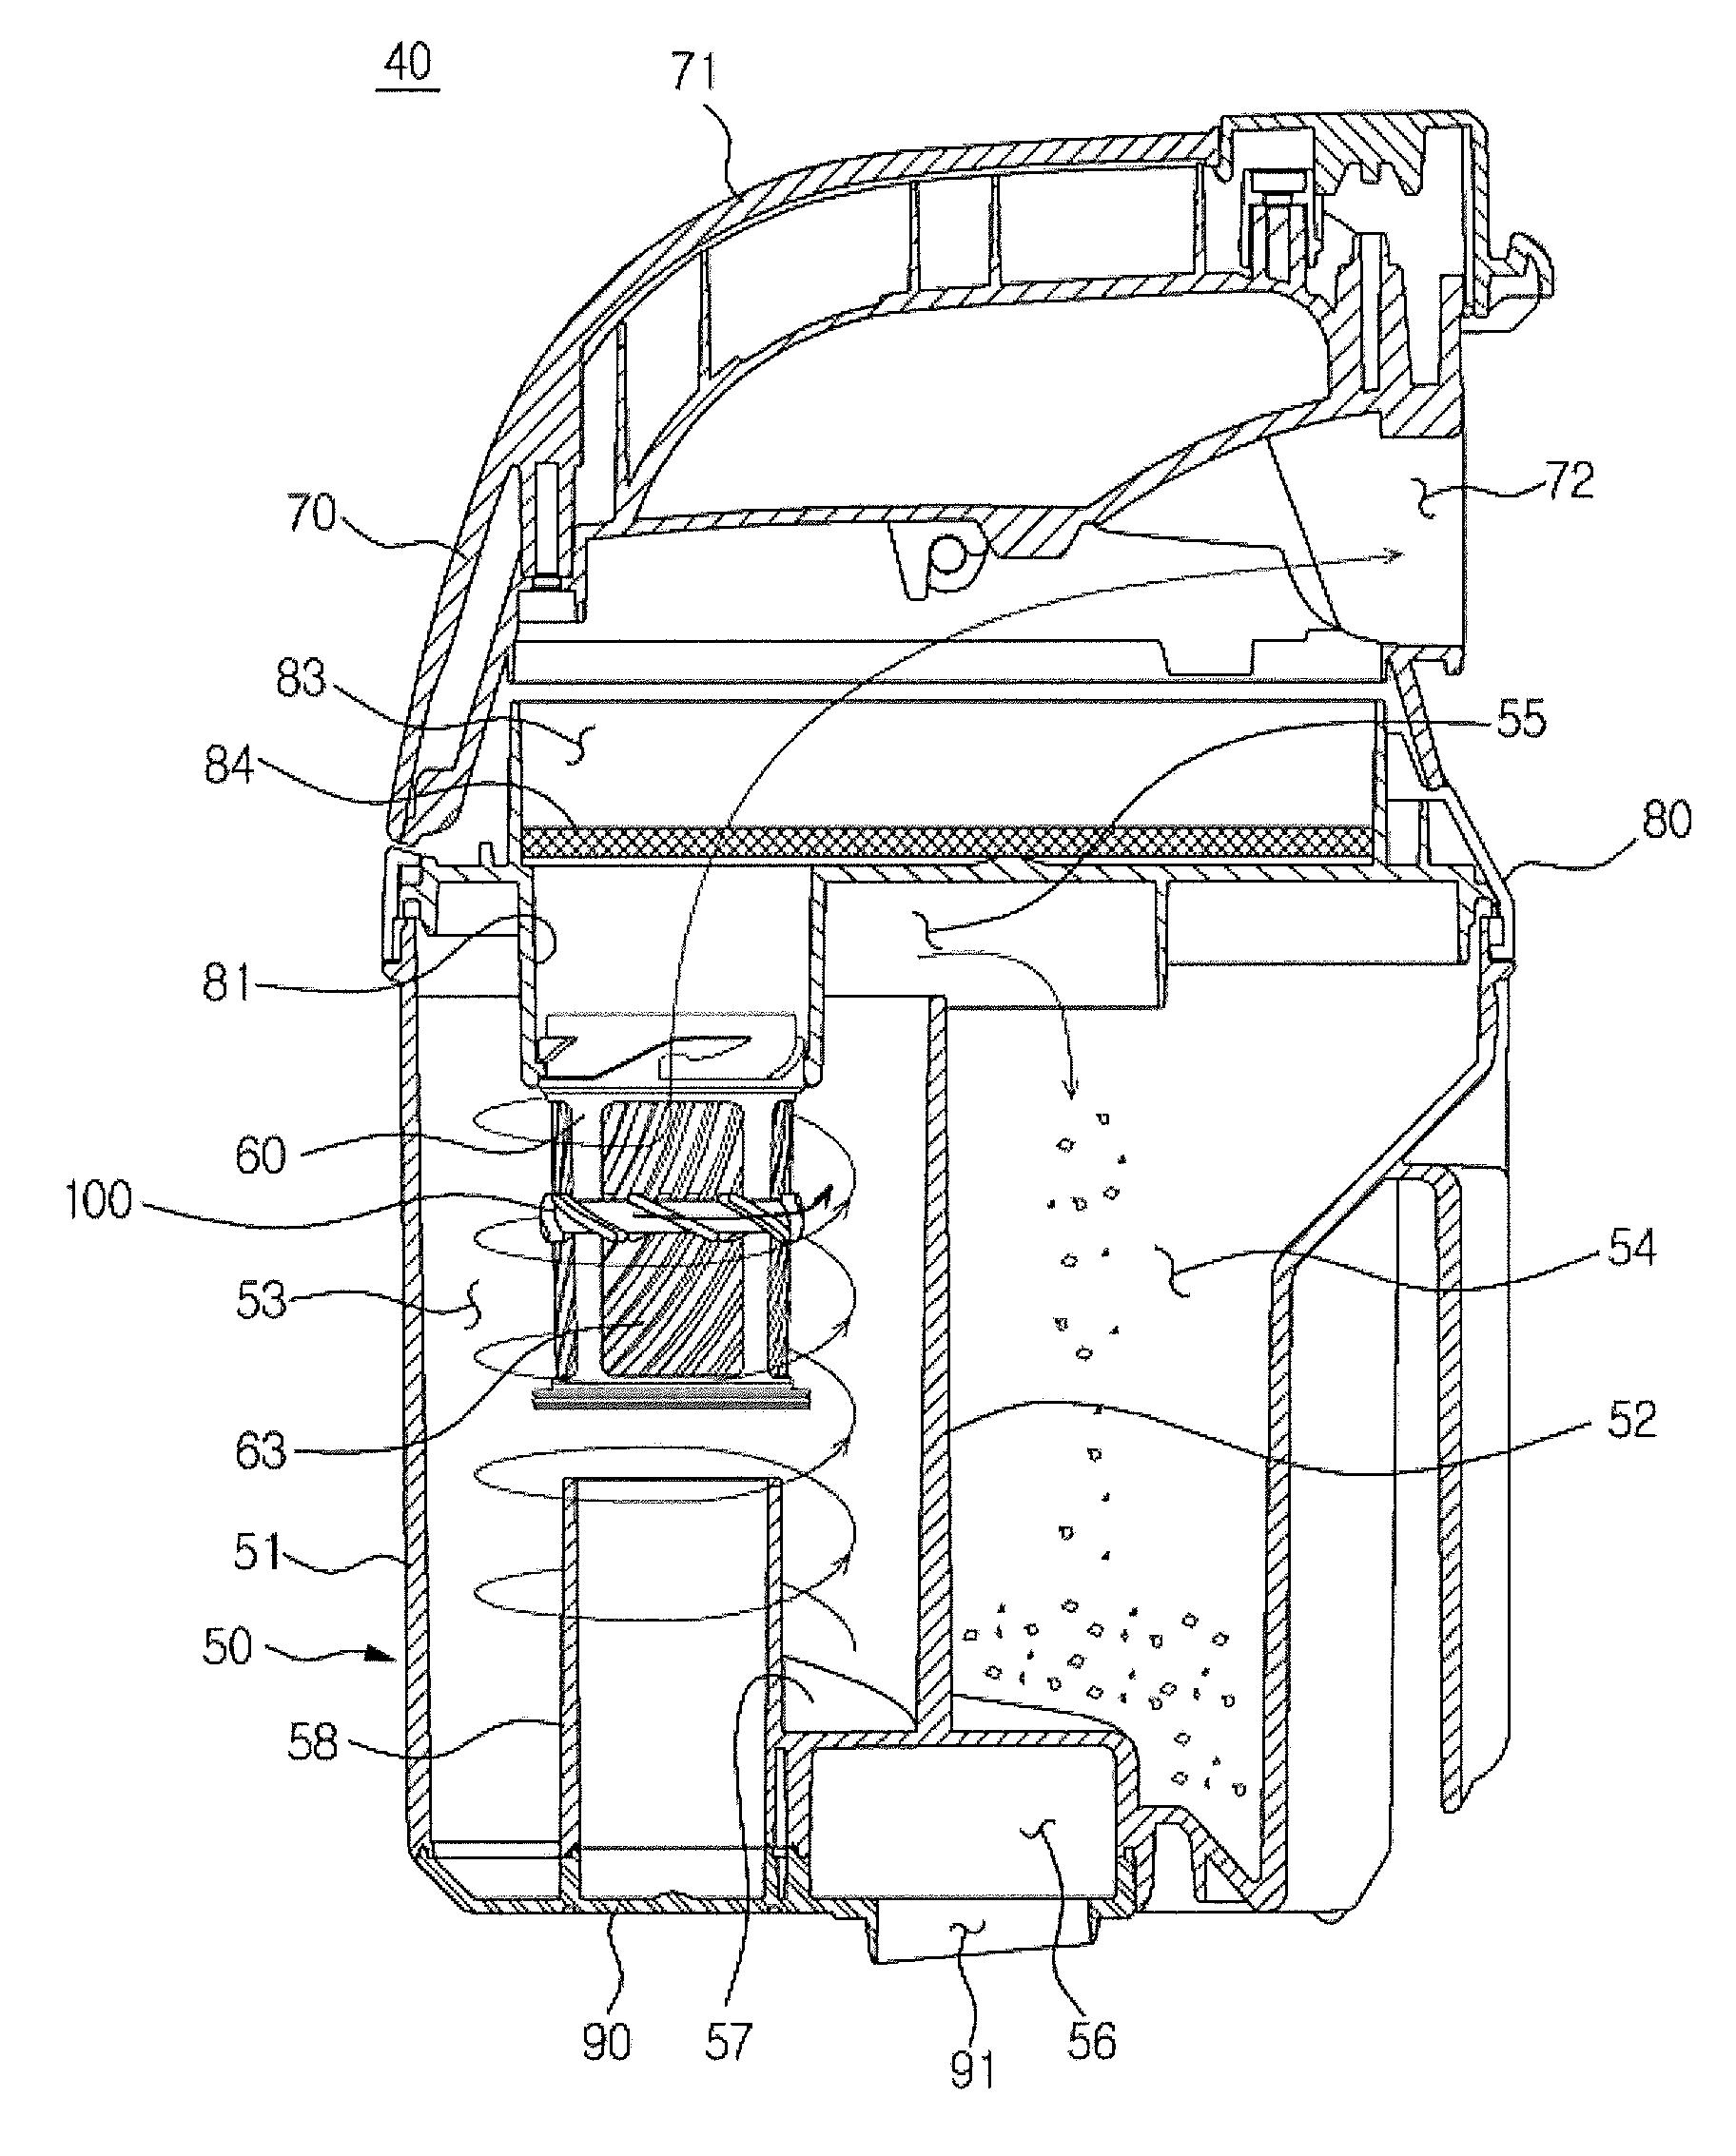 Cyclone dust collector and vacuum cleaner having the same